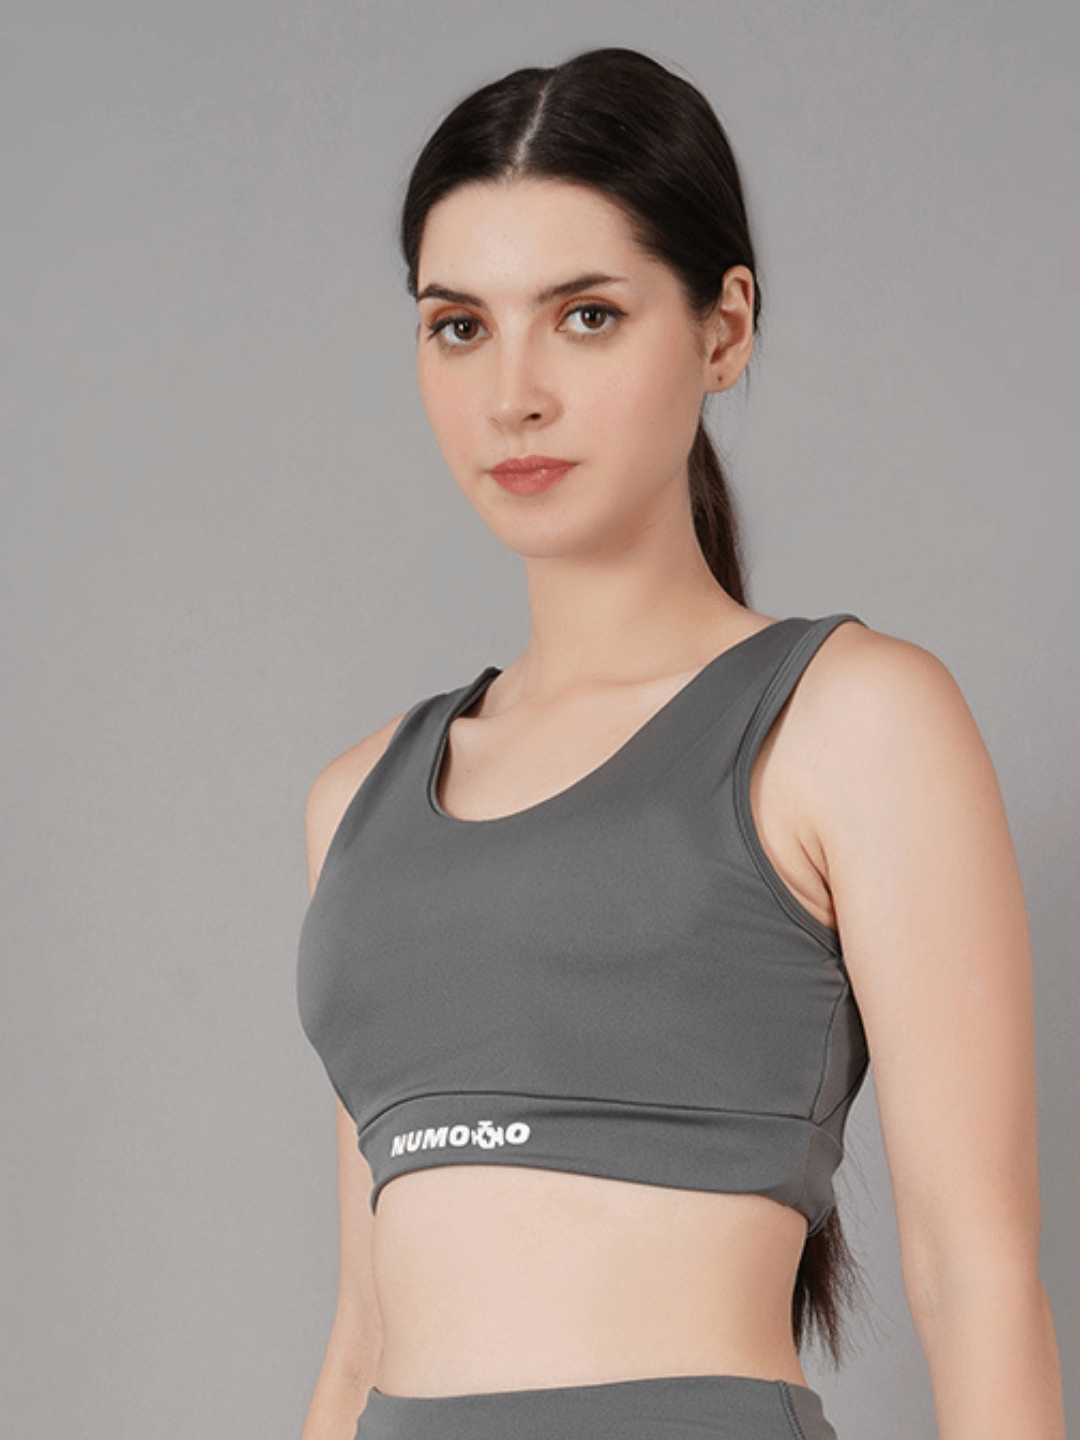 Ouno Padded Straps Sports Bra for Women Zip Front Workout Yoga Bras, 3  Pack: Black Nude Navy, Medium fits 30B 30C 30D 32A price in UAE,   UAE